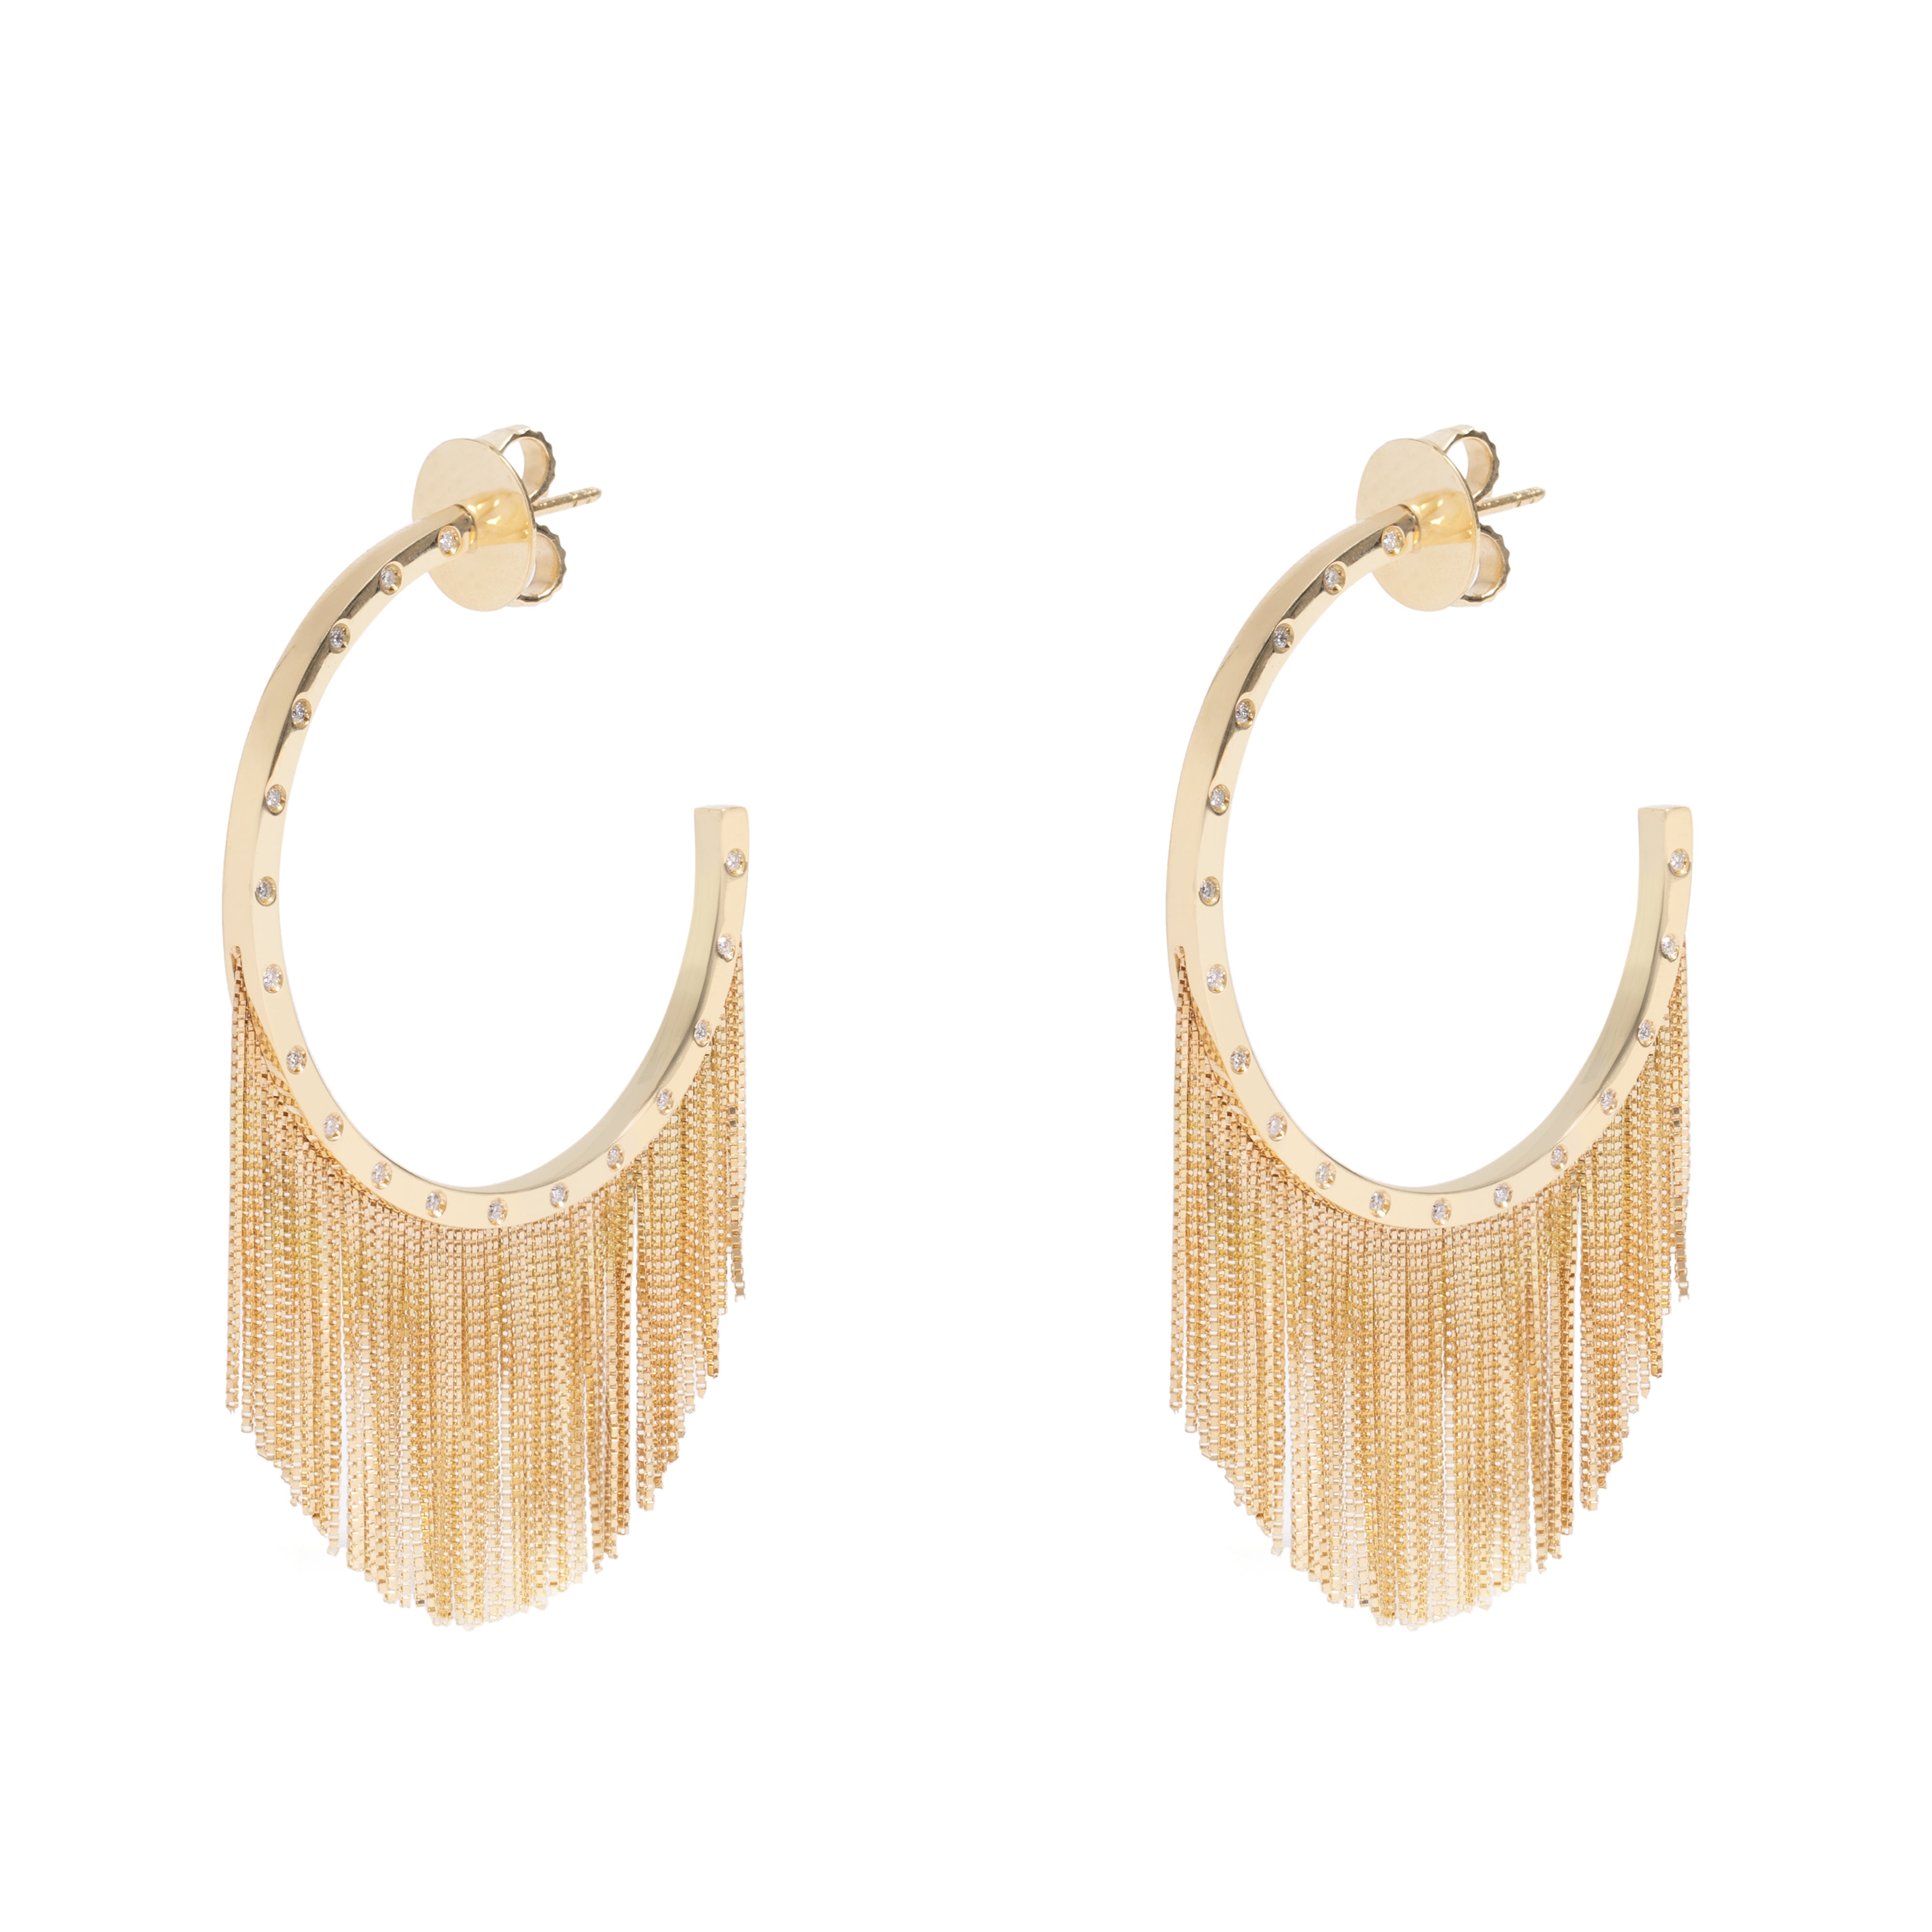 NEW VINTAGE POWER FRINGE HOOP EARRING IN 18K YELLOW GOLD WITH DIAMOND